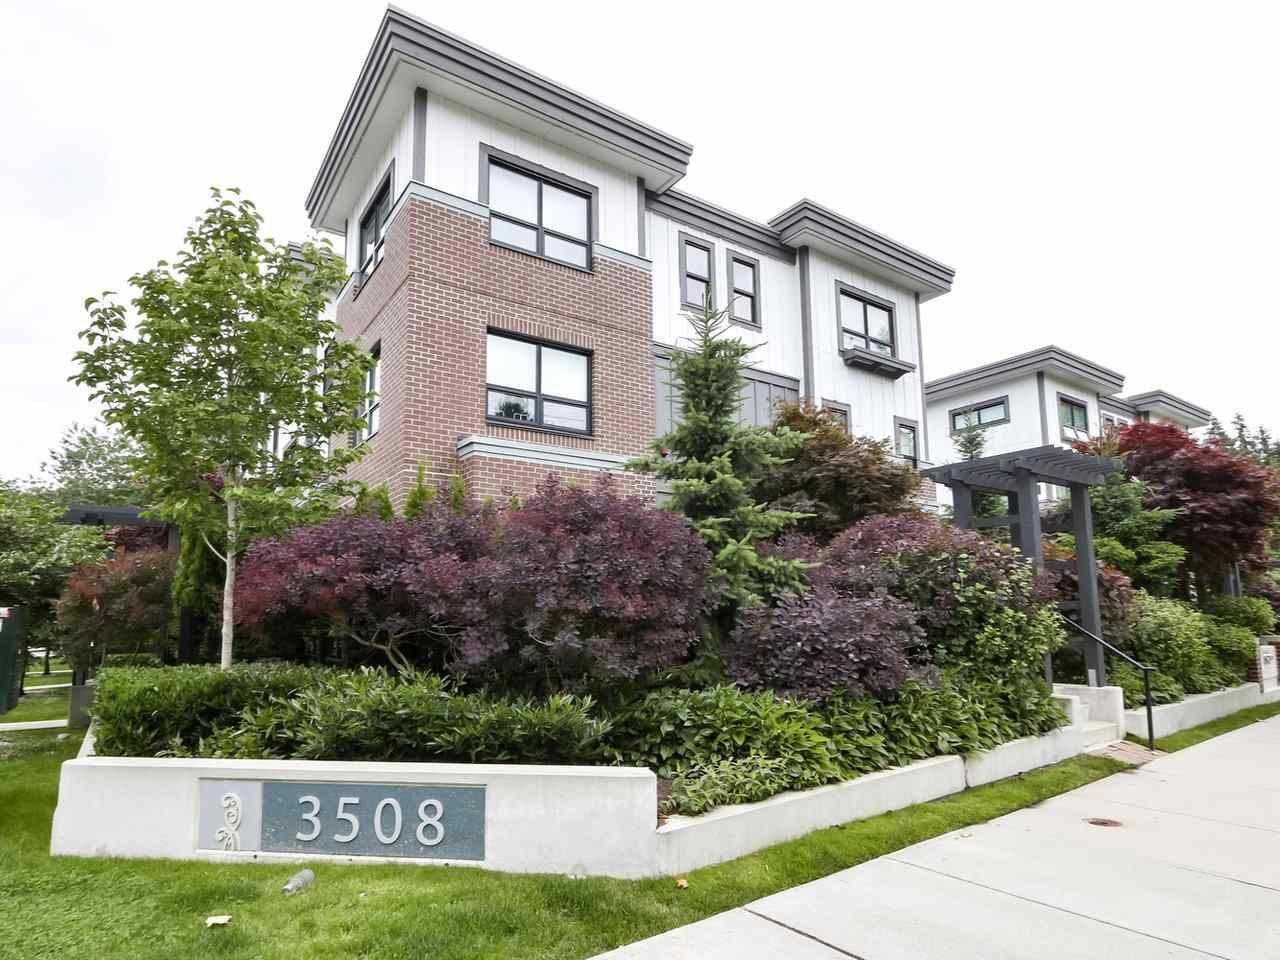 Main Photo: 12 3508 MT SEYMOUR PARKWAY in : Northlands Townhouse for sale : MLS®# R2469083